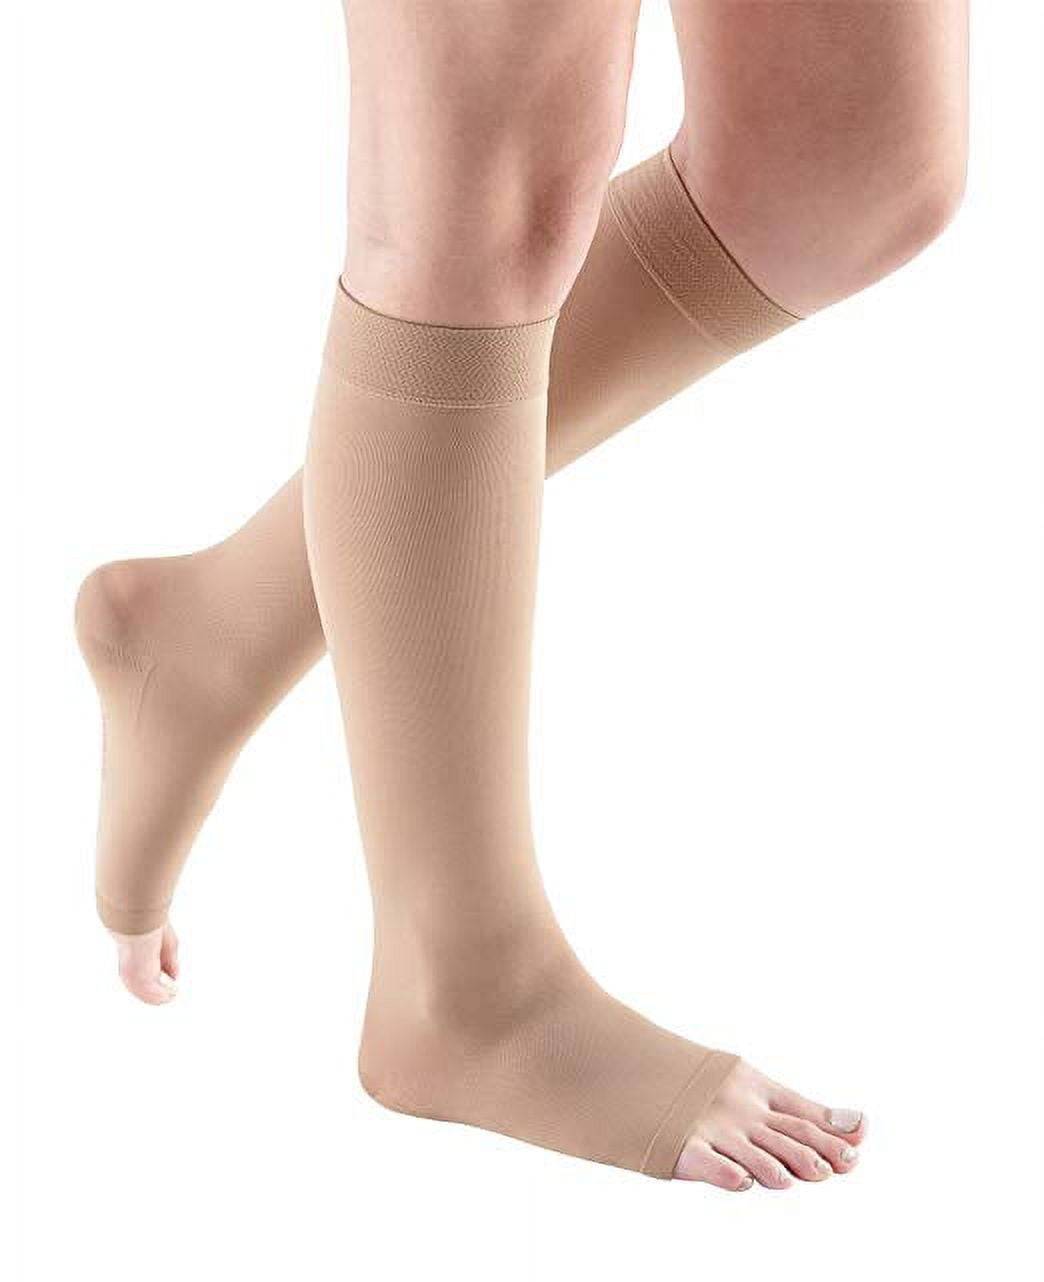 Extra Wide Womens Open Toe Compression Pantyhose 20-30 mmHg - Black, 3XL